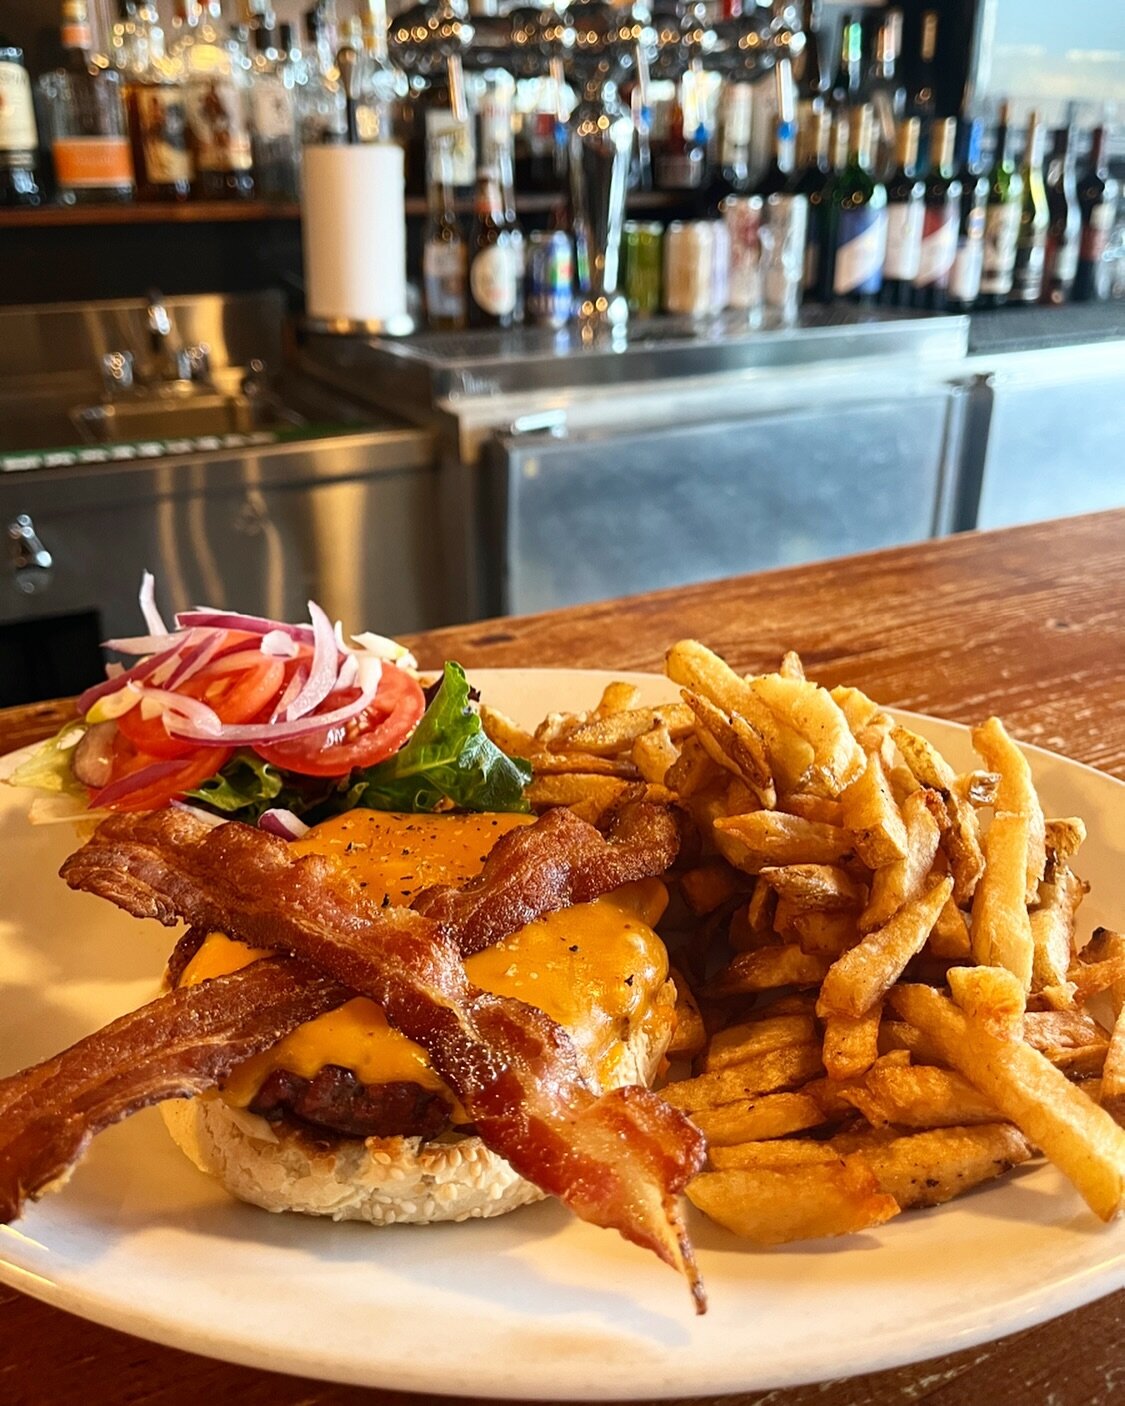 Flame-Grilled Beef Burger🍔 
~ add cheese and bacon like this lovely customer for a party in your mouth ~ 

P.S. just ask for pickles, we gotchu! 

OPEN EVERYDAY 9am-8pm. THAT&rsquo;S RIGHT, even TUESDAY!